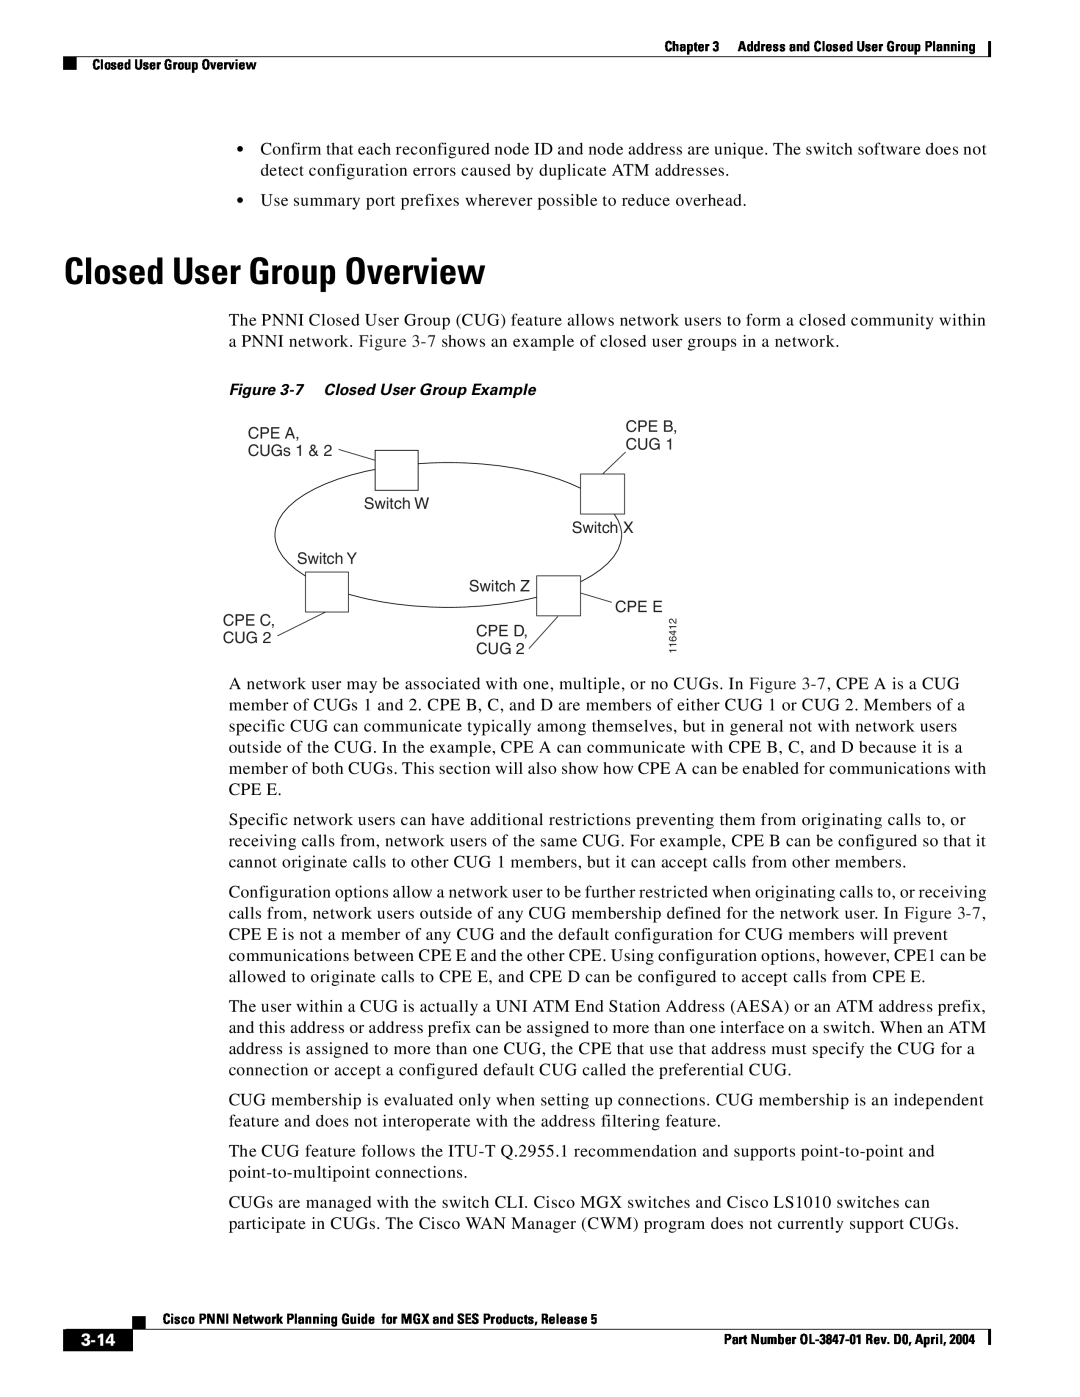 Cisco Systems Network Router manual Closed User Group Overview, 3-14 